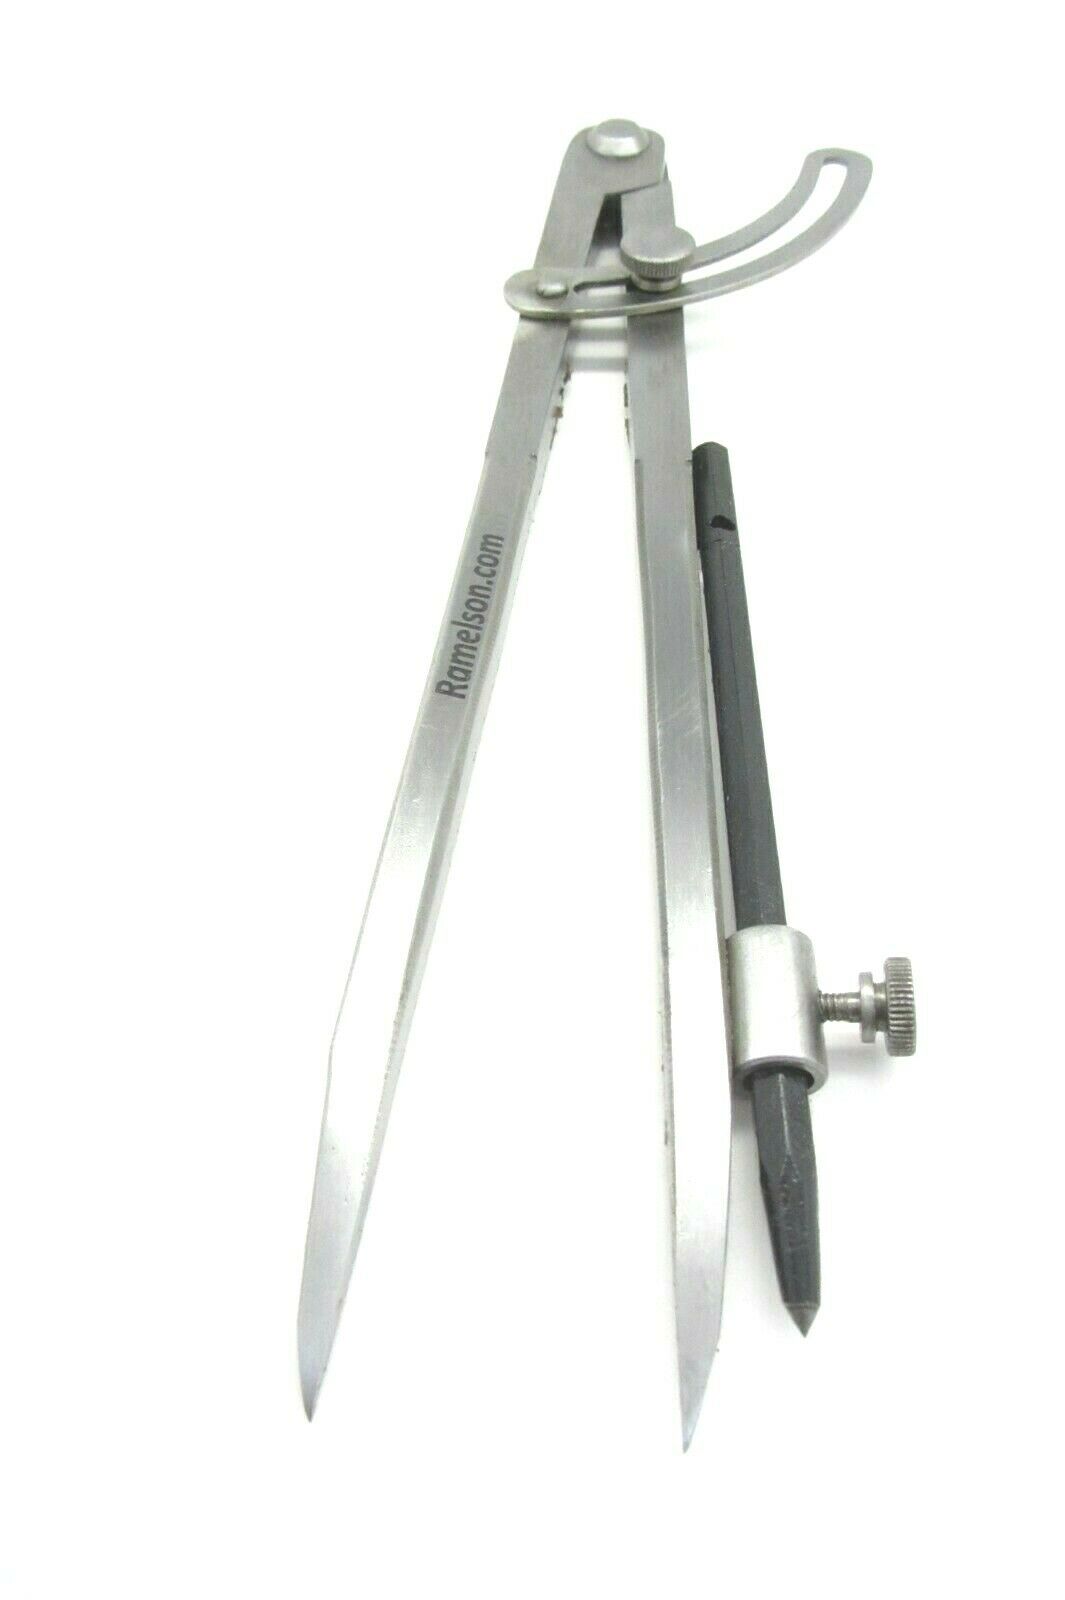 Various Sizes Available Heavy Duty Proops Steel Divider Compass with Setting Wing Free UK Postage. Woodwork Metalwork